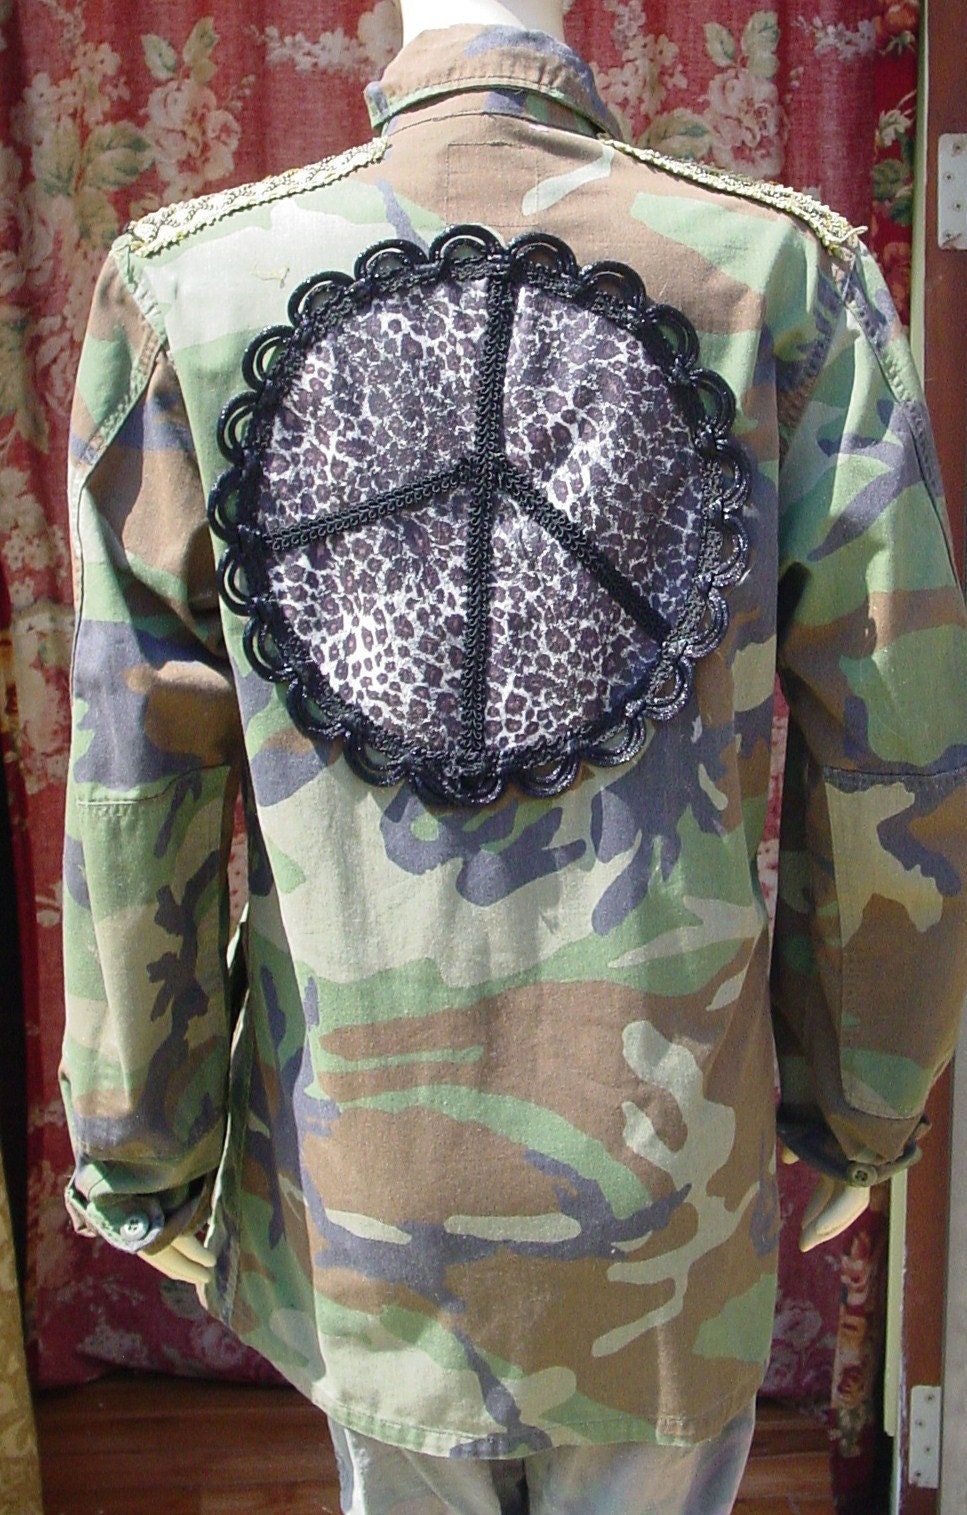 altered army jacket with Johnny cash at Folsom prison,wear some attitude OOAK designed by C. Reinke